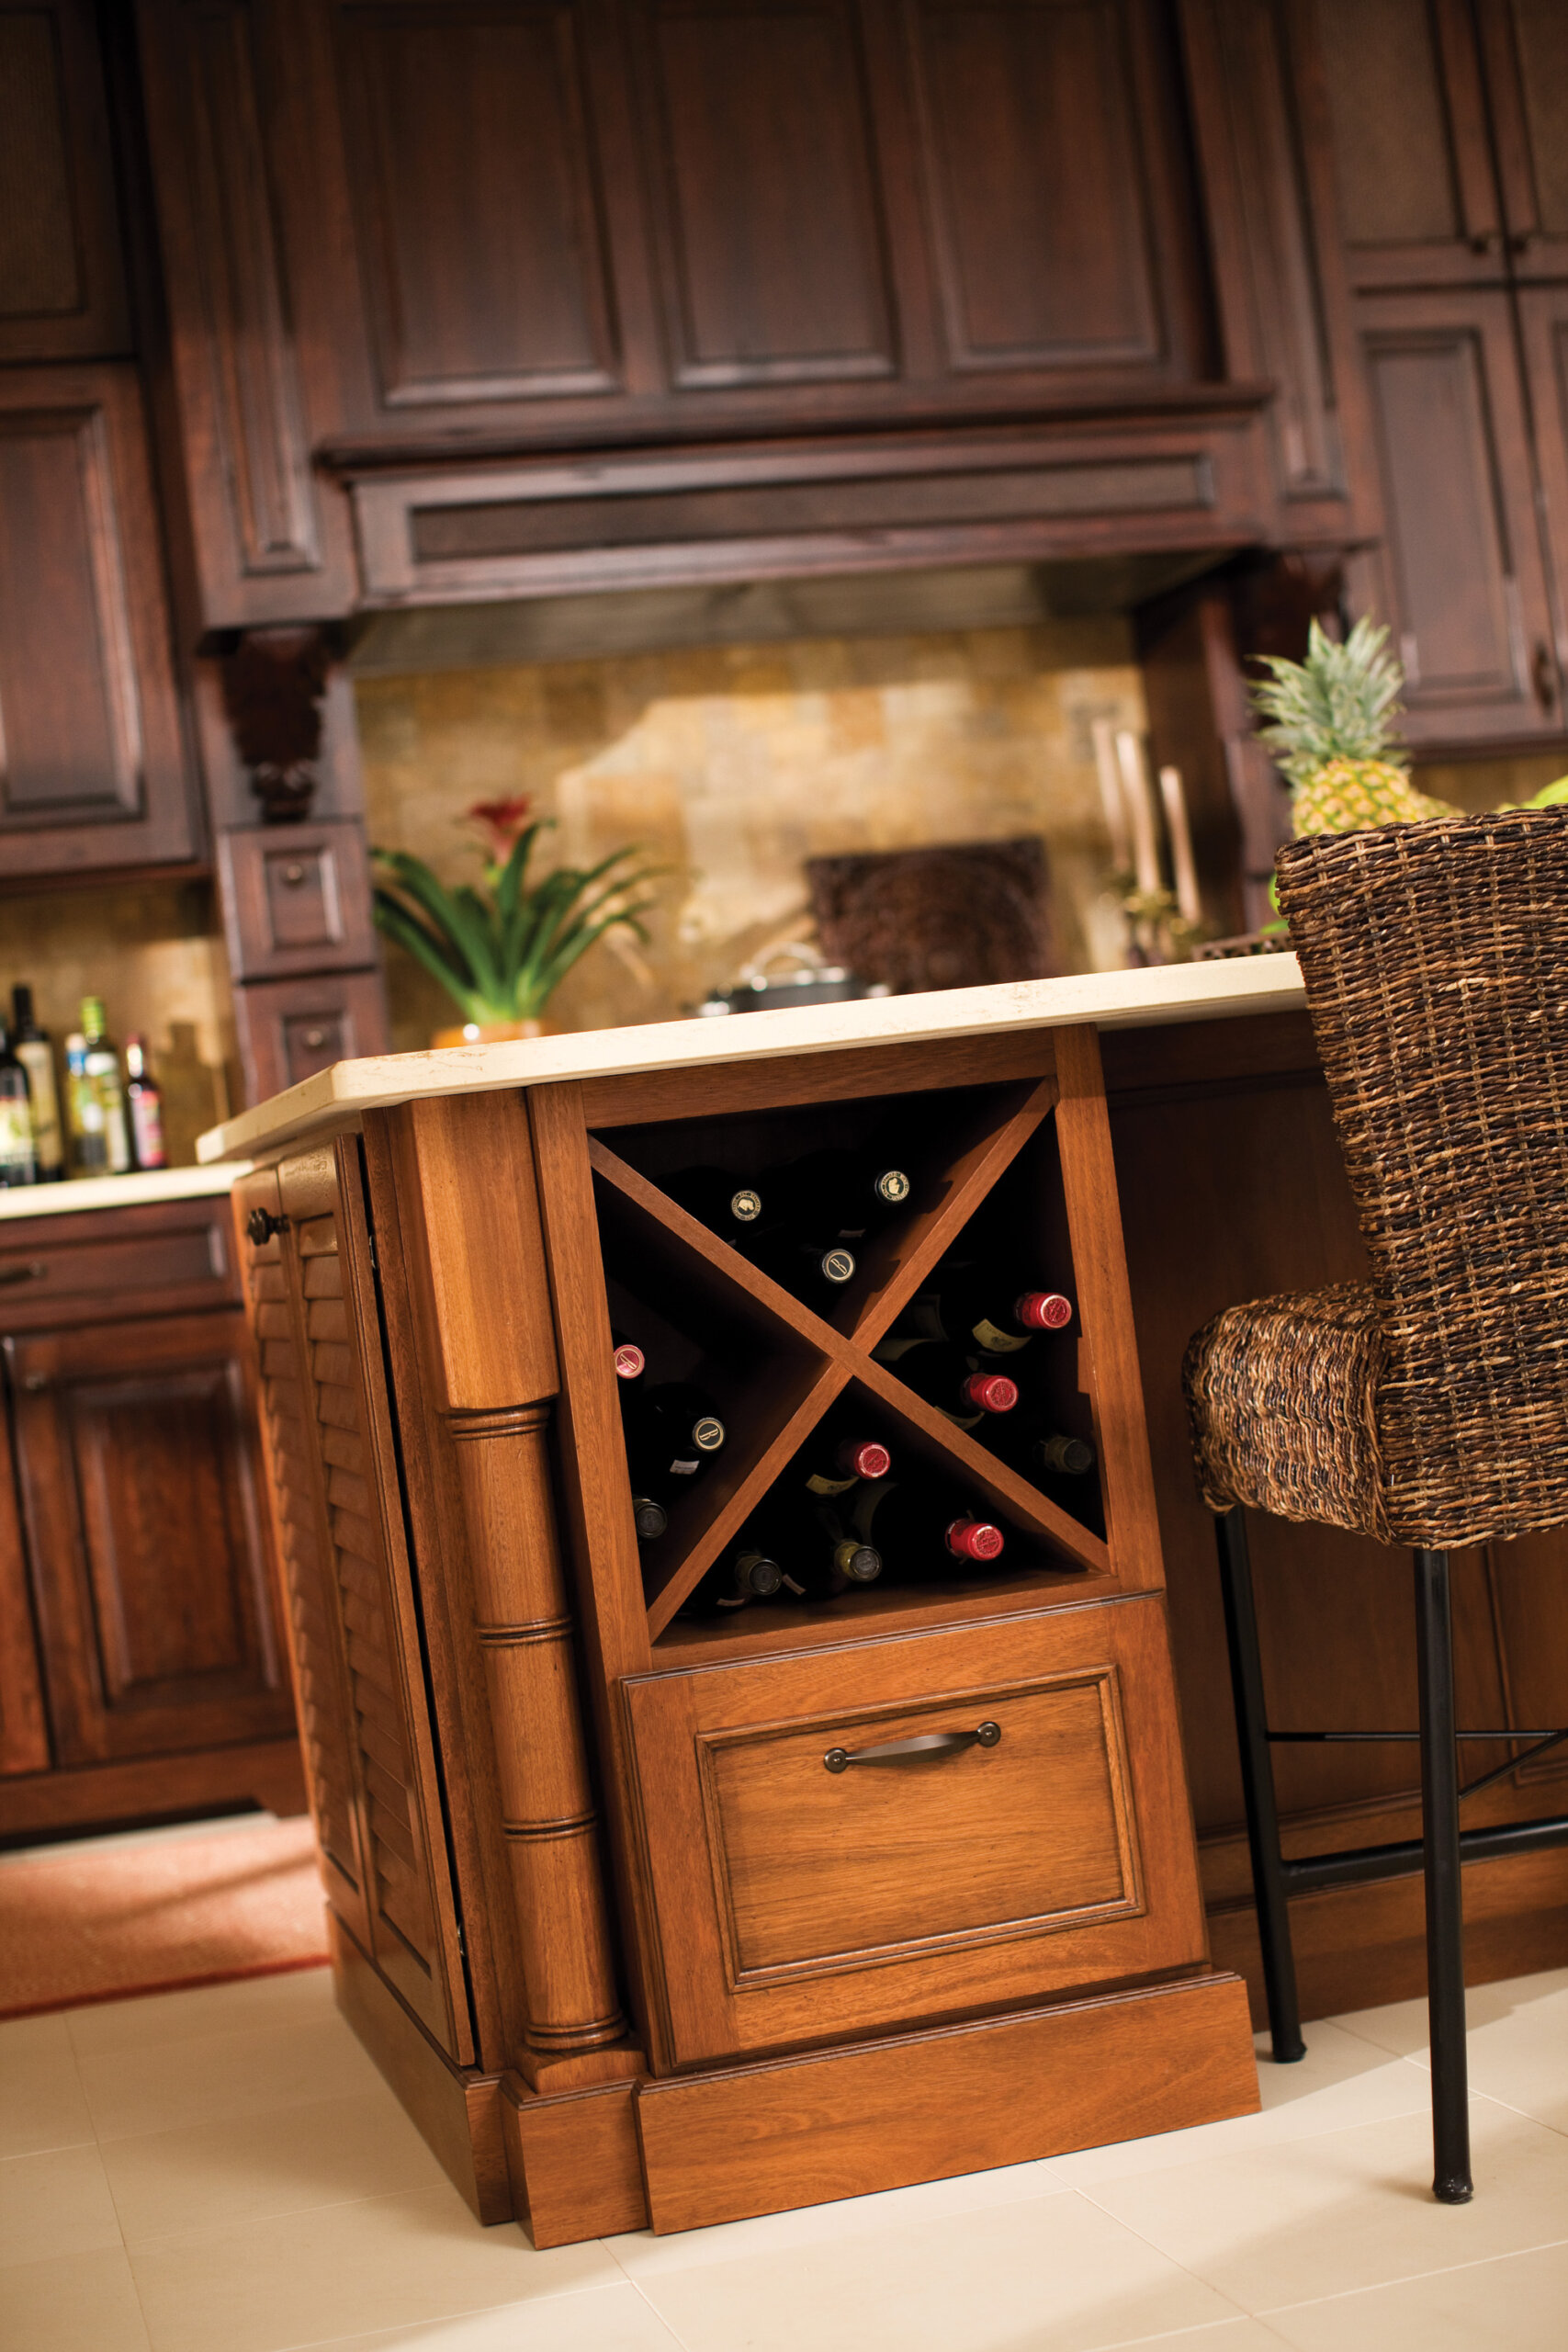 A base kitchen cabinet with a large x wine rack and a drawer below shown on a kitchen island.